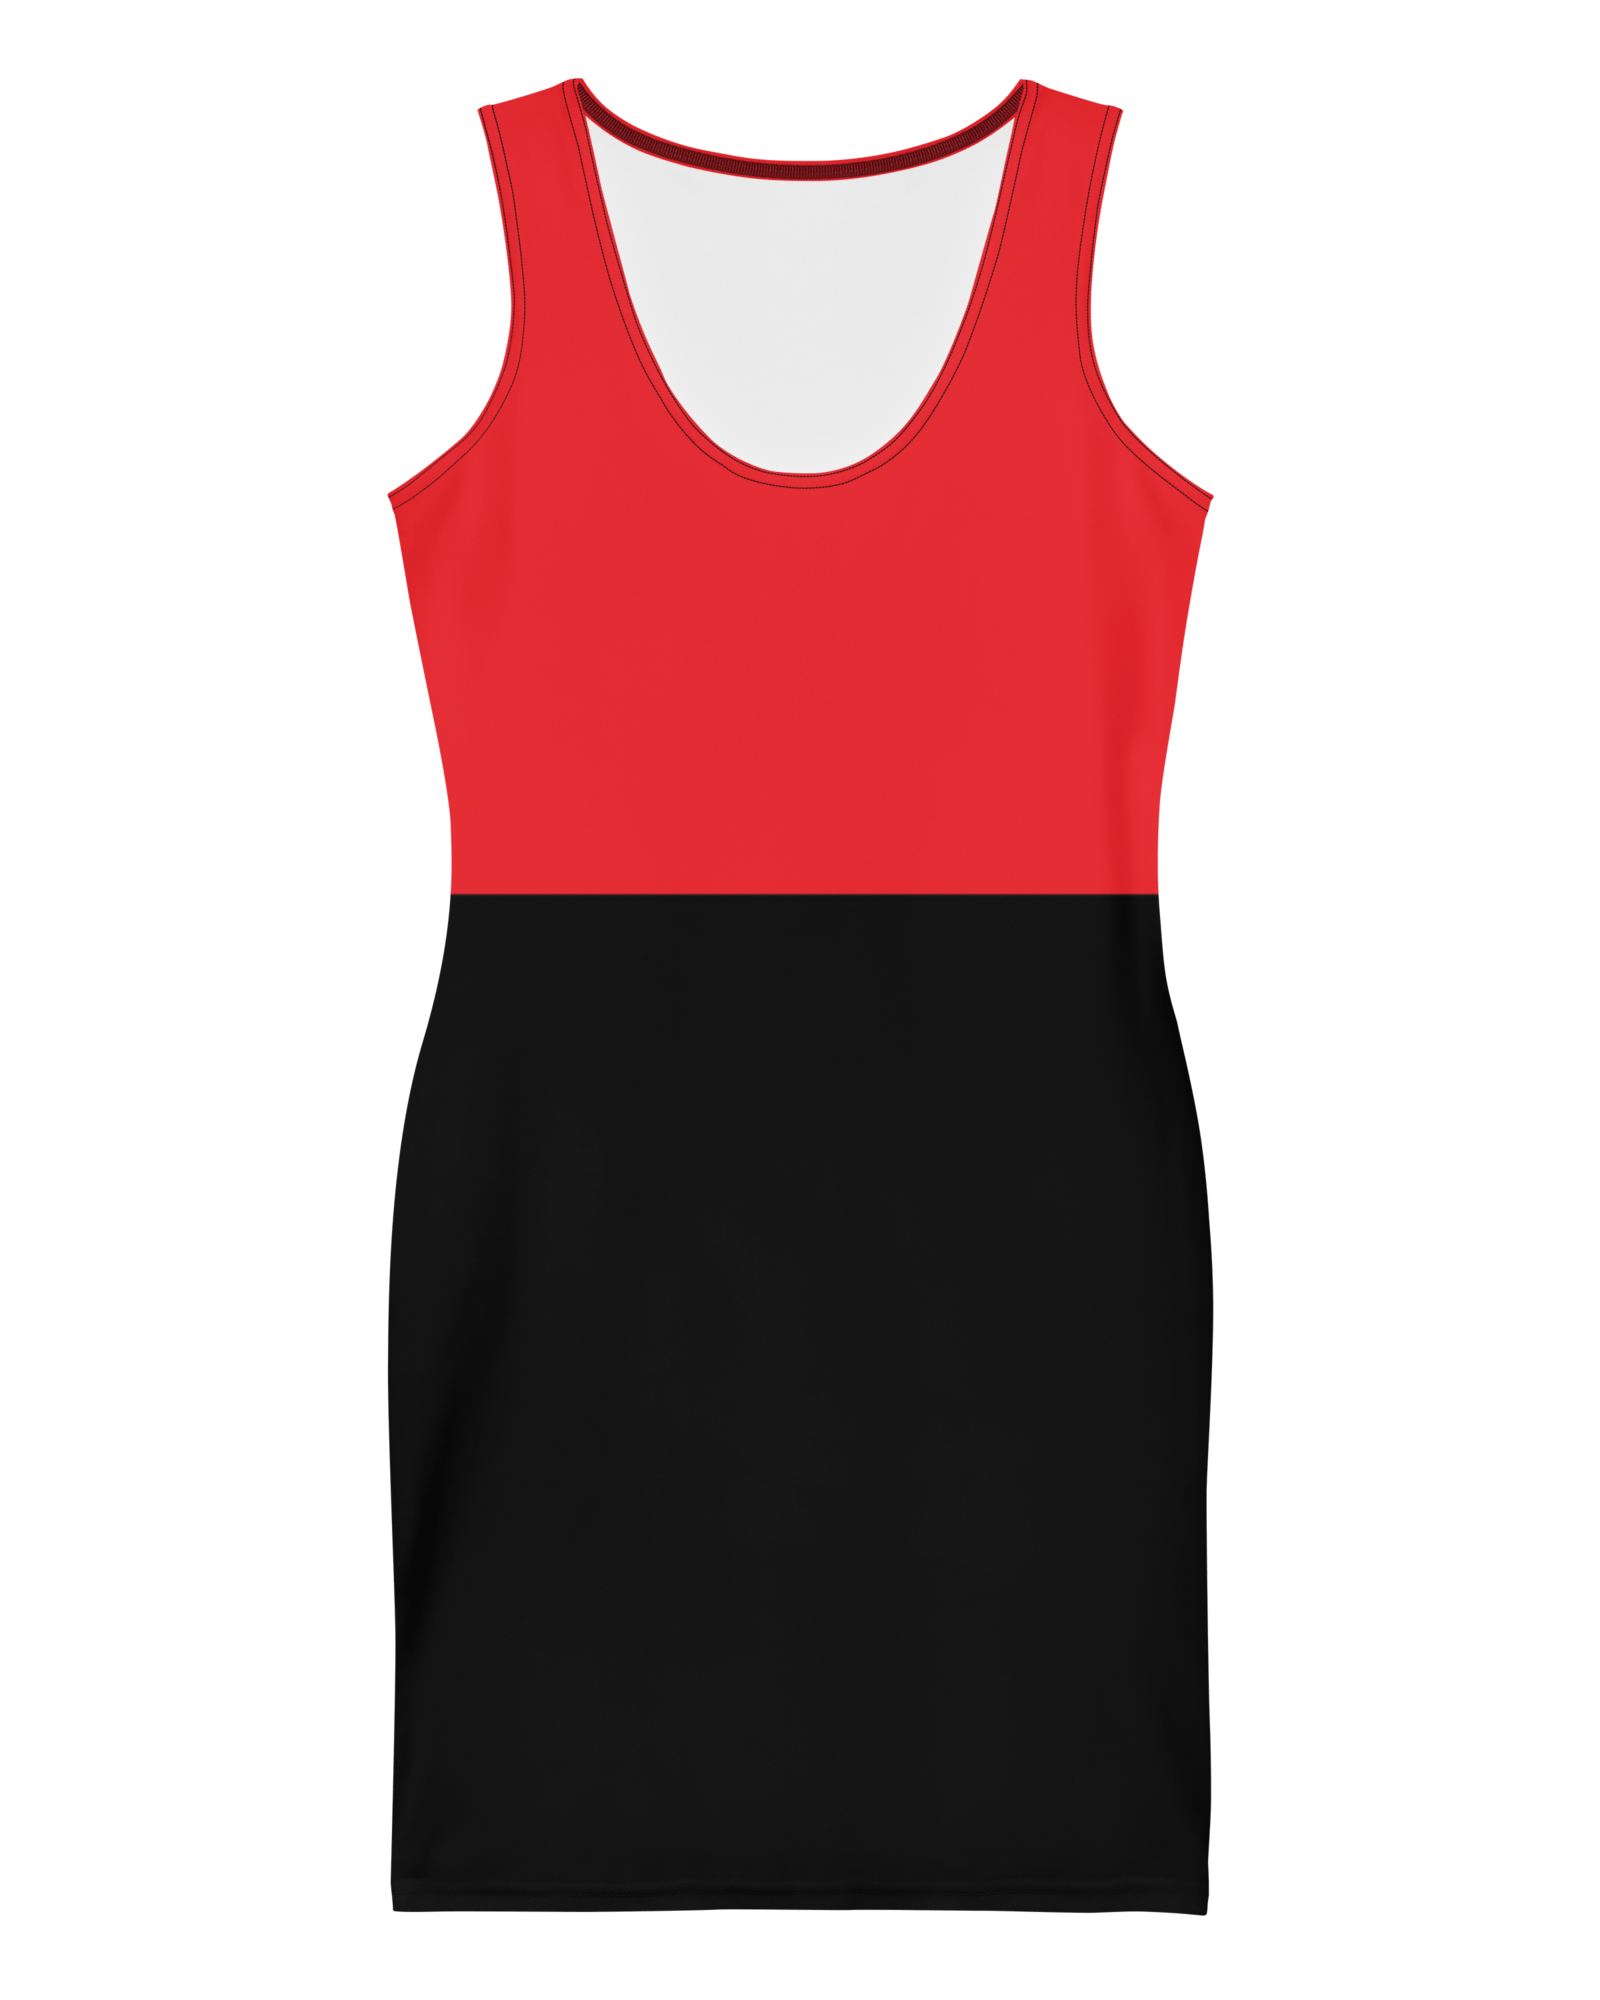 New Bond Street Fitted Dress | Red & Black Fitted Dress Jolly & Goode